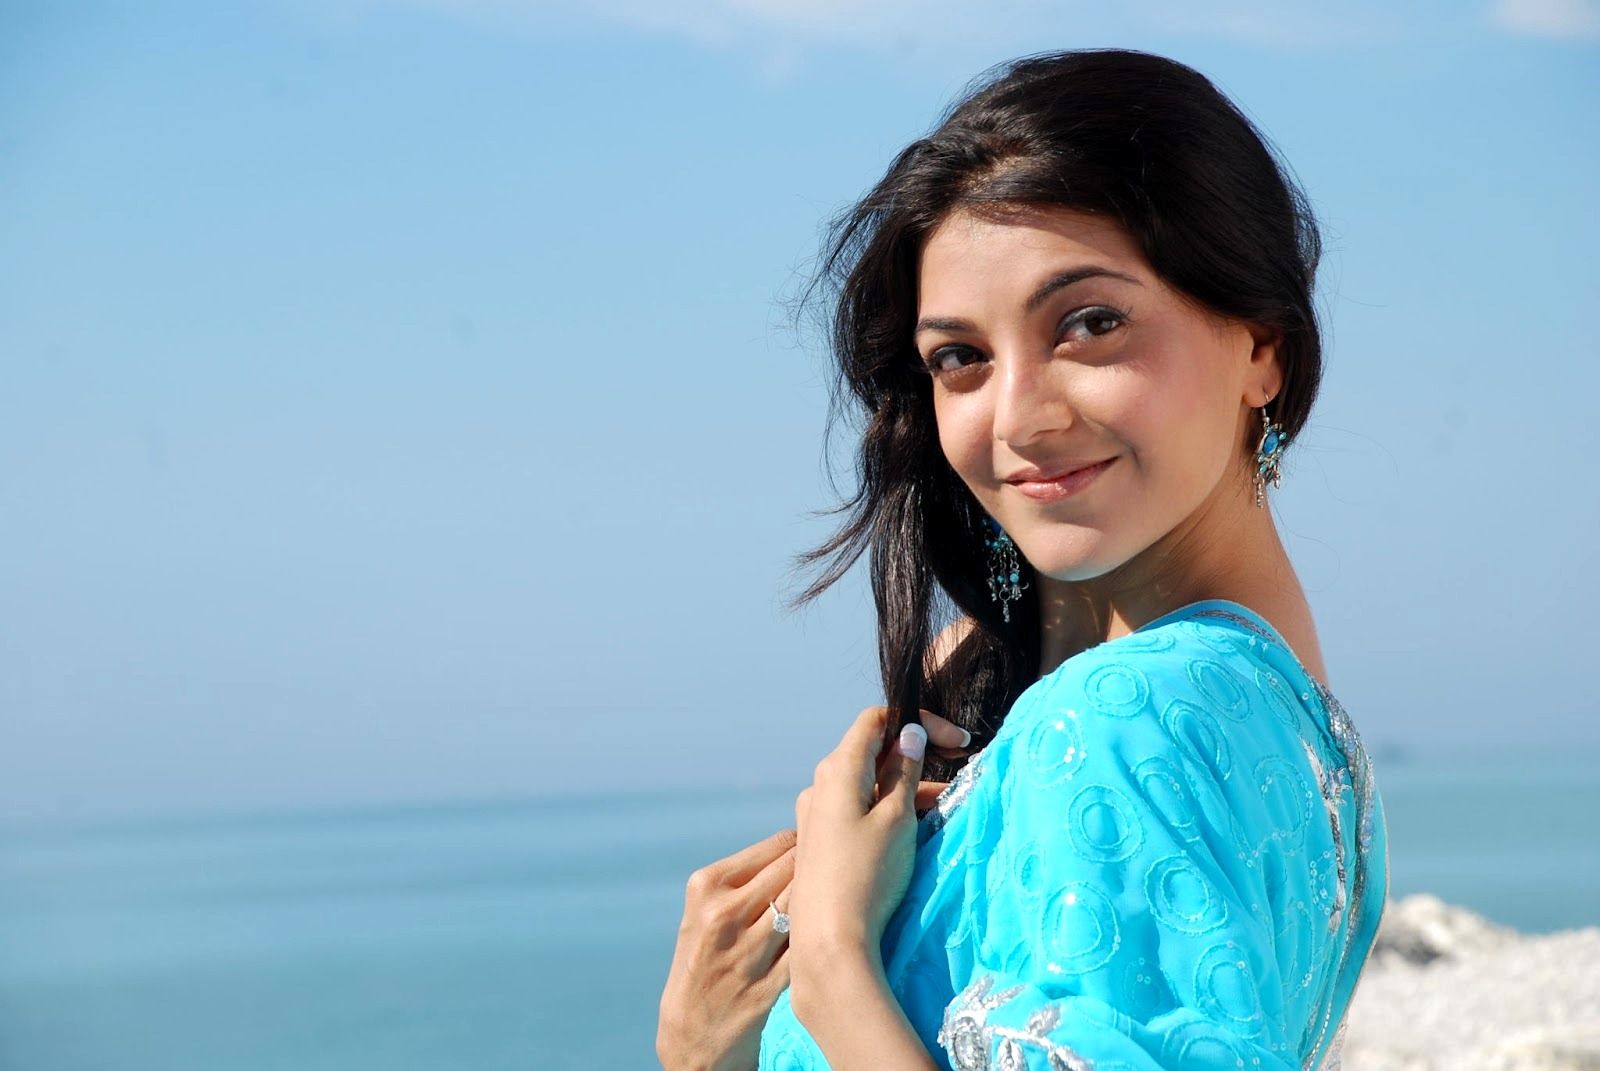 Hot Top 35 Kajal Aggarwal Wallpapers HD Images Photos Collection